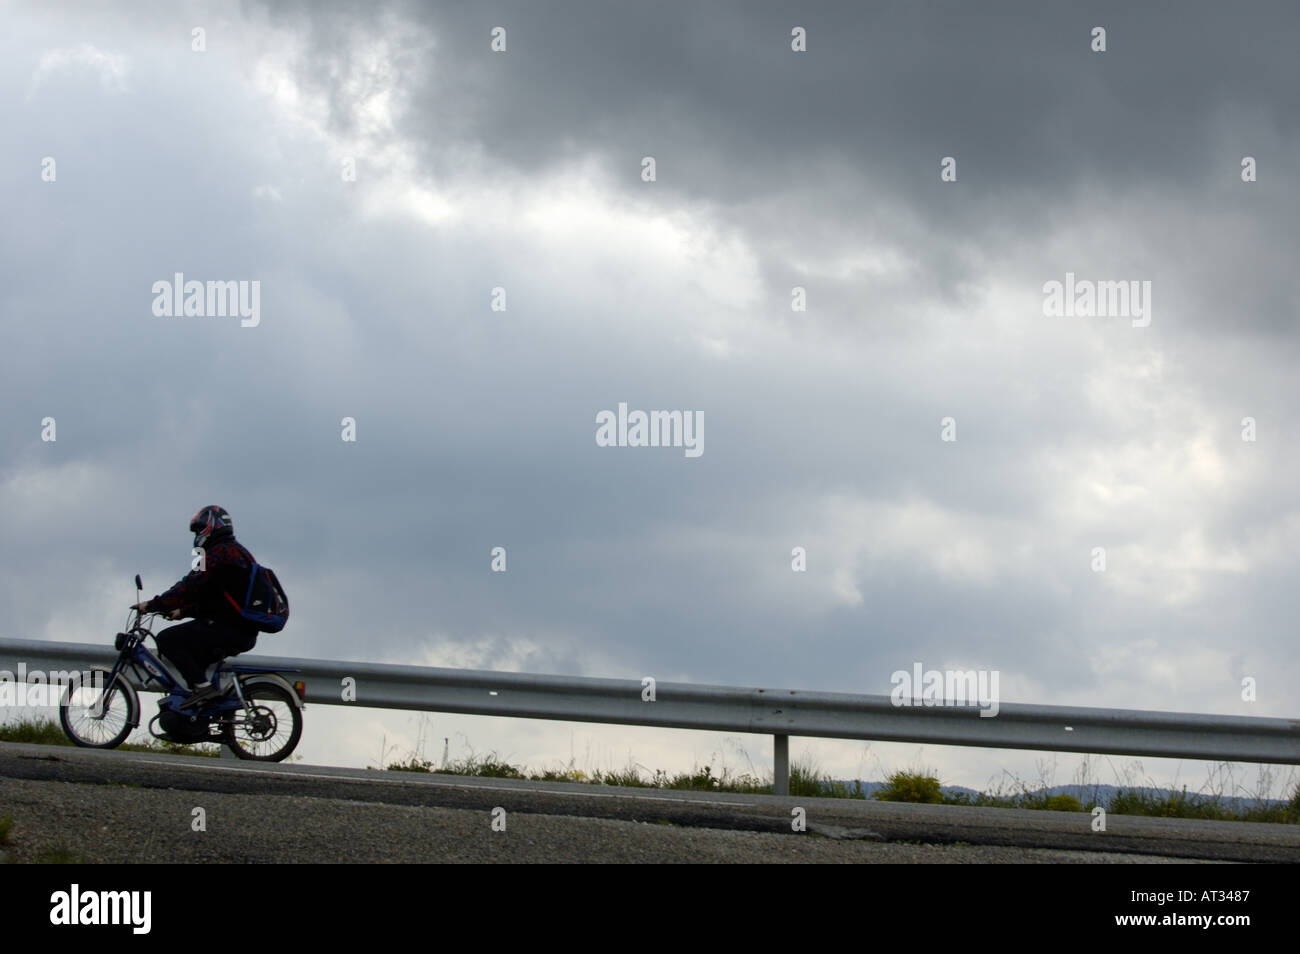 Moped on a road against a stormy sky, Saint-Paul-Trois-Châteaux, Drome, France. Stock Photo